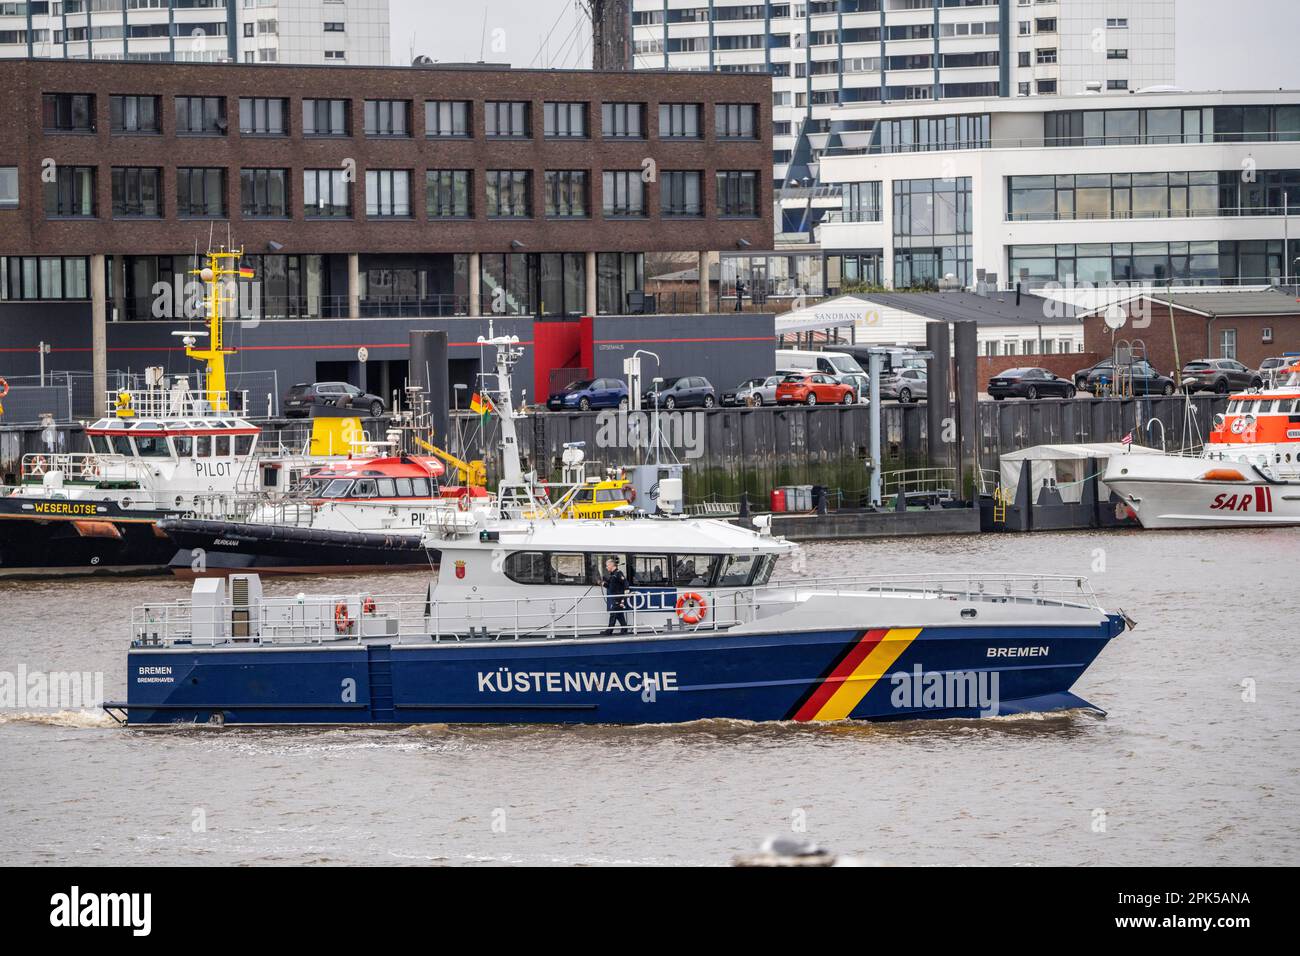 Customs boat Bremen, Coast Guard, in the harbour of Bremerhaven, Lower Saxony, Germany, Stock Photo